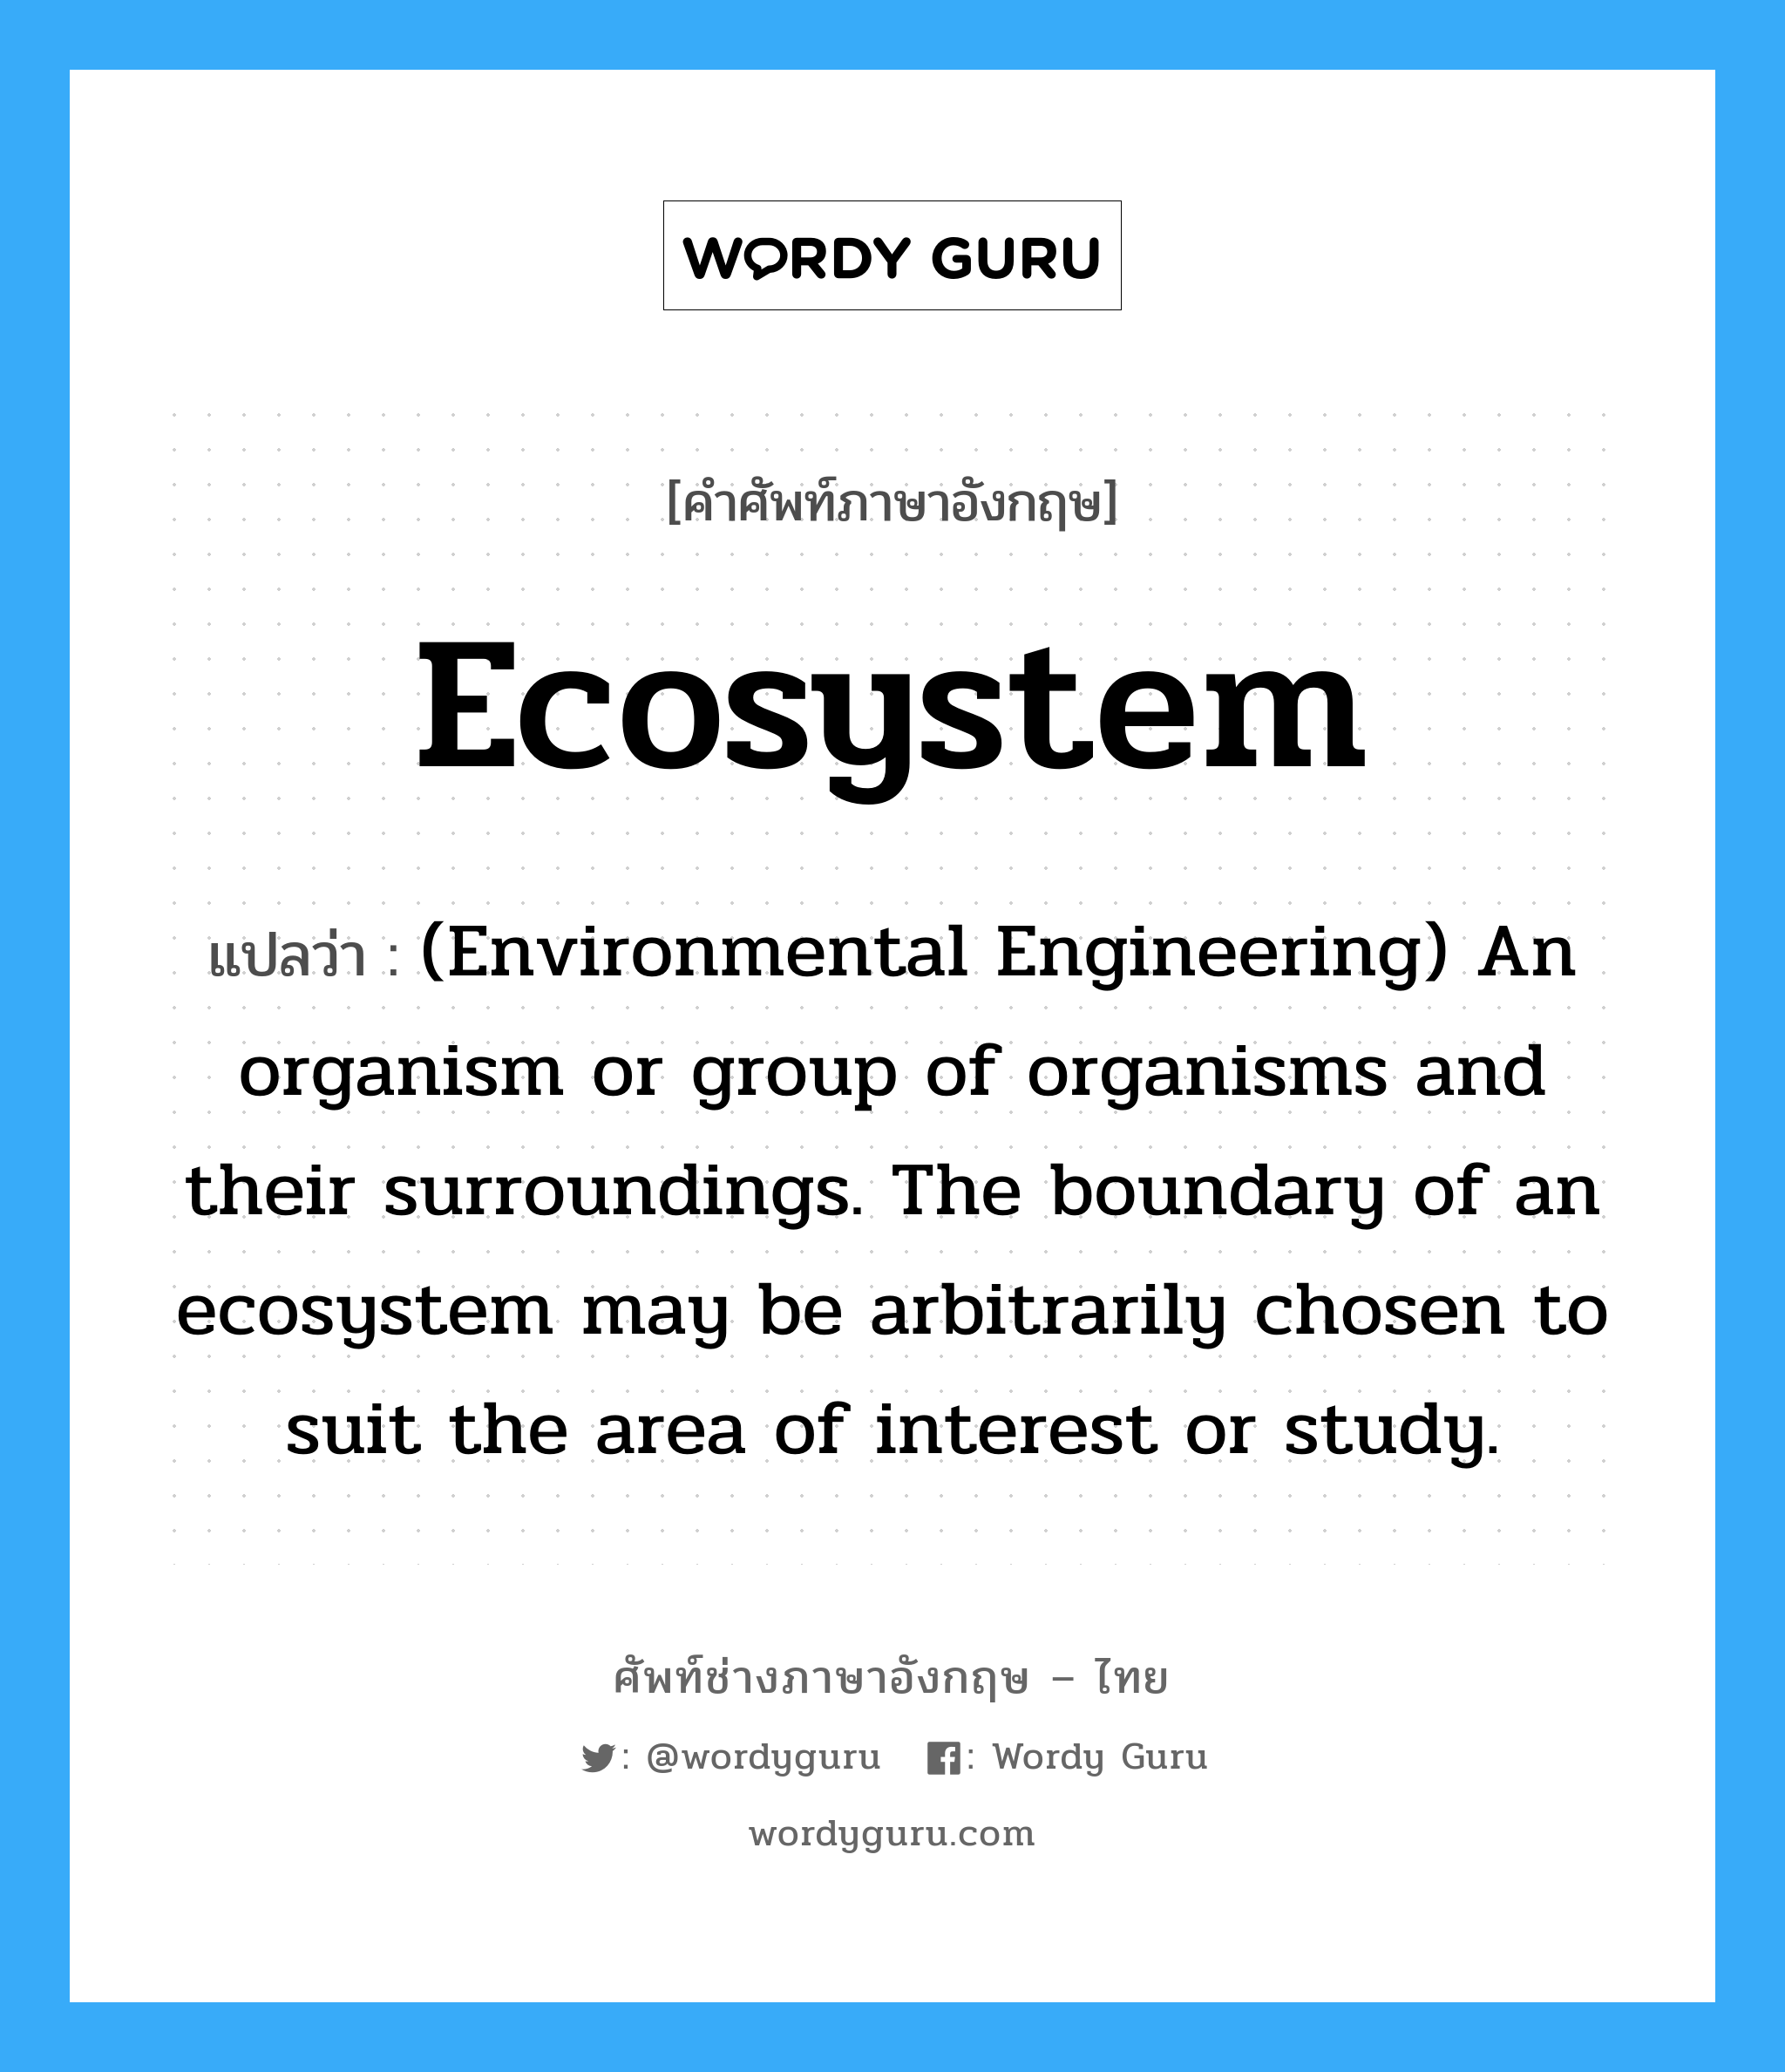 (Environmental Engineering) An organism or group of organisms and their surroundings. The boundary of an ecosystem may be arbitrarily chosen to suit the area of interest or study. ภาษาอังกฤษ?, คำศัพท์ช่างภาษาอังกฤษ - ไทย (Environmental Engineering) An organism or group of organisms and their surroundings. The boundary of an ecosystem may be arbitrarily chosen to suit the area of interest or study. คำศัพท์ภาษาอังกฤษ (Environmental Engineering) An organism or group of organisms and their surroundings. The boundary of an ecosystem may be arbitrarily chosen to suit the area of interest or study. แปลว่า Ecosystem